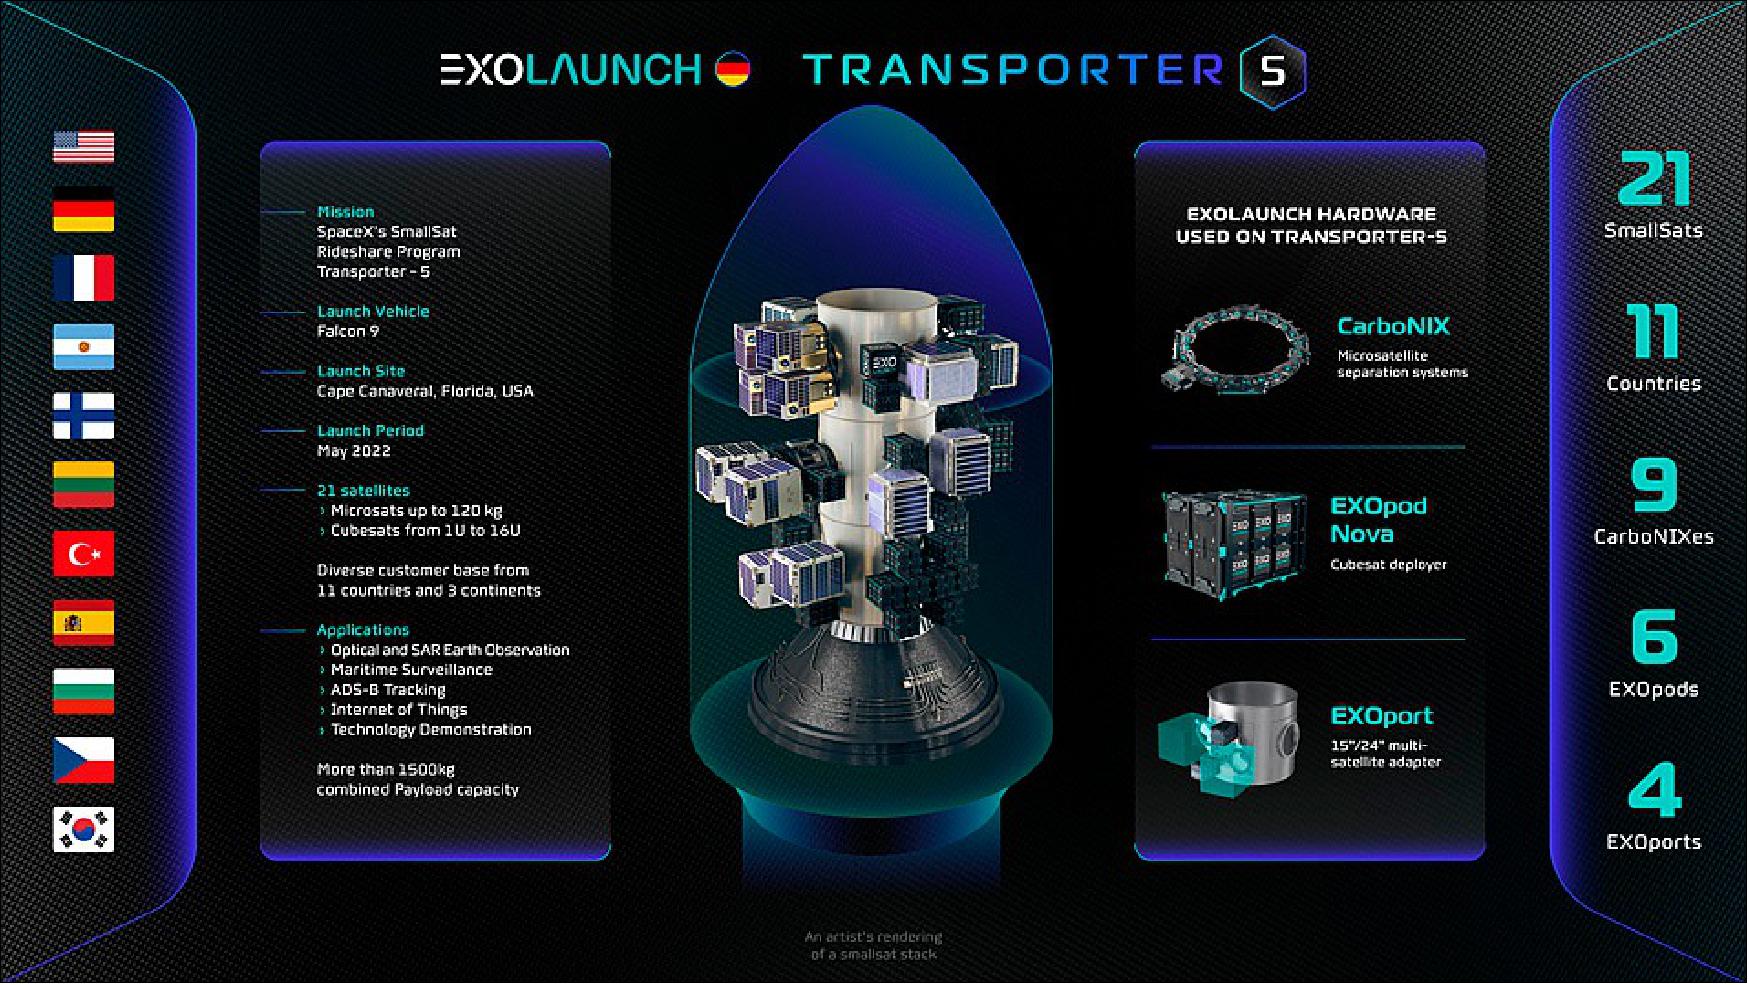 Figure 5: Transporter-5 will launch Exolaunch's new and returning customers, including Spire Global, Satellogic, ICEYE, NanoAvionics, Omnispace, Thales Alenia Space, Satlantis, EnduroSat, Plan-S, Spacemanic, Aalto University and Space Products and Innovation. The customers' payloads will enable space application technologies such as Optical and Synthetic Aperture Radar observation, Maritime Surveillance, and IoT communications. (image credit: Exolaunch)